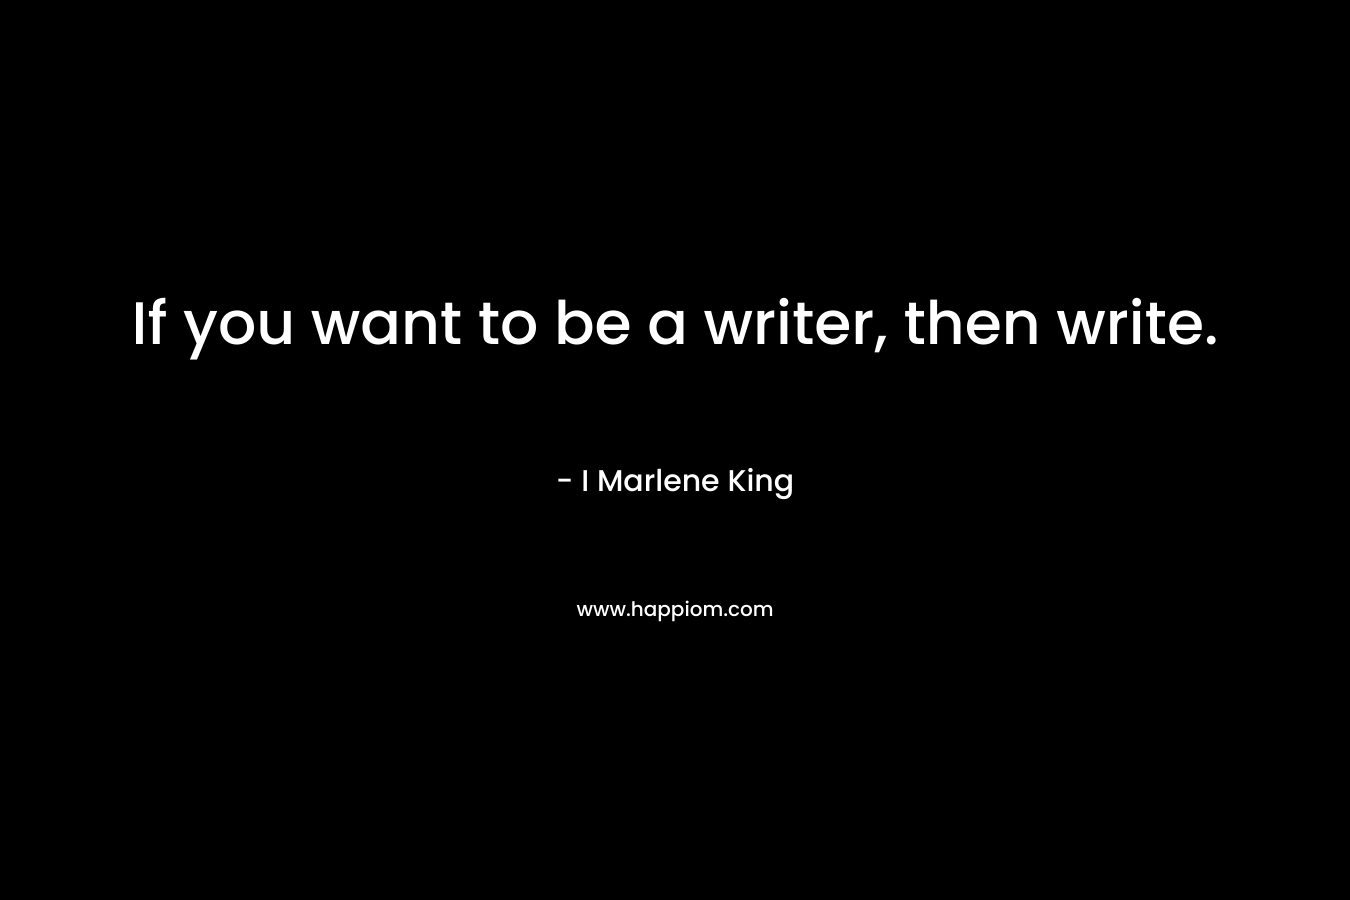 If you want to be a writer, then write. – I Marlene King